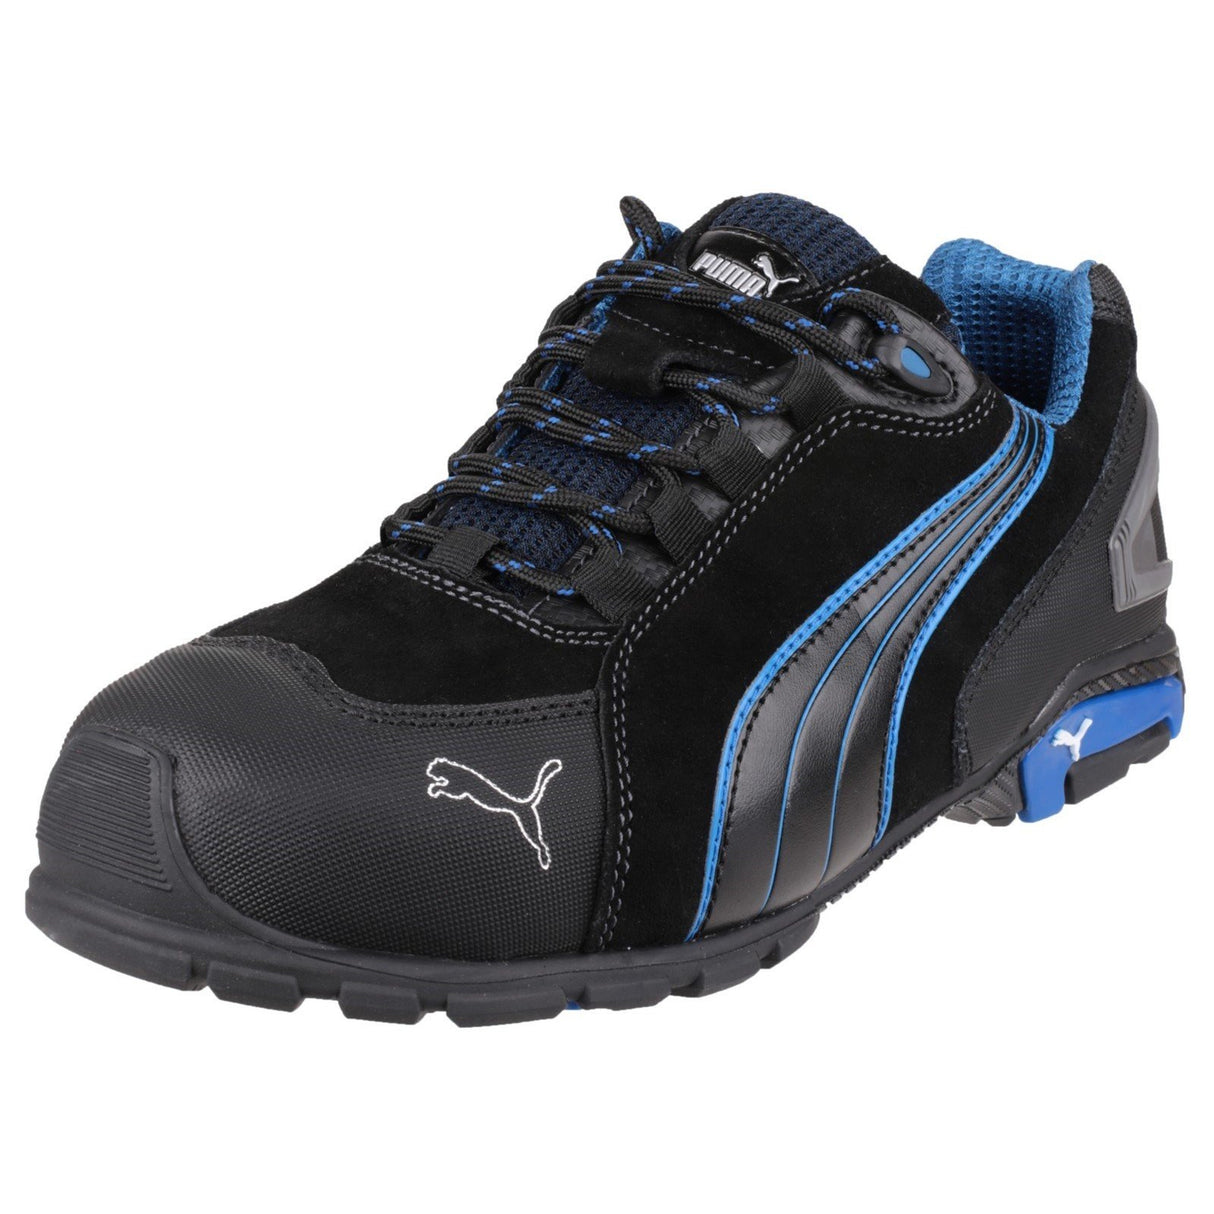 Puma Safety Rio Low Safety Trainers